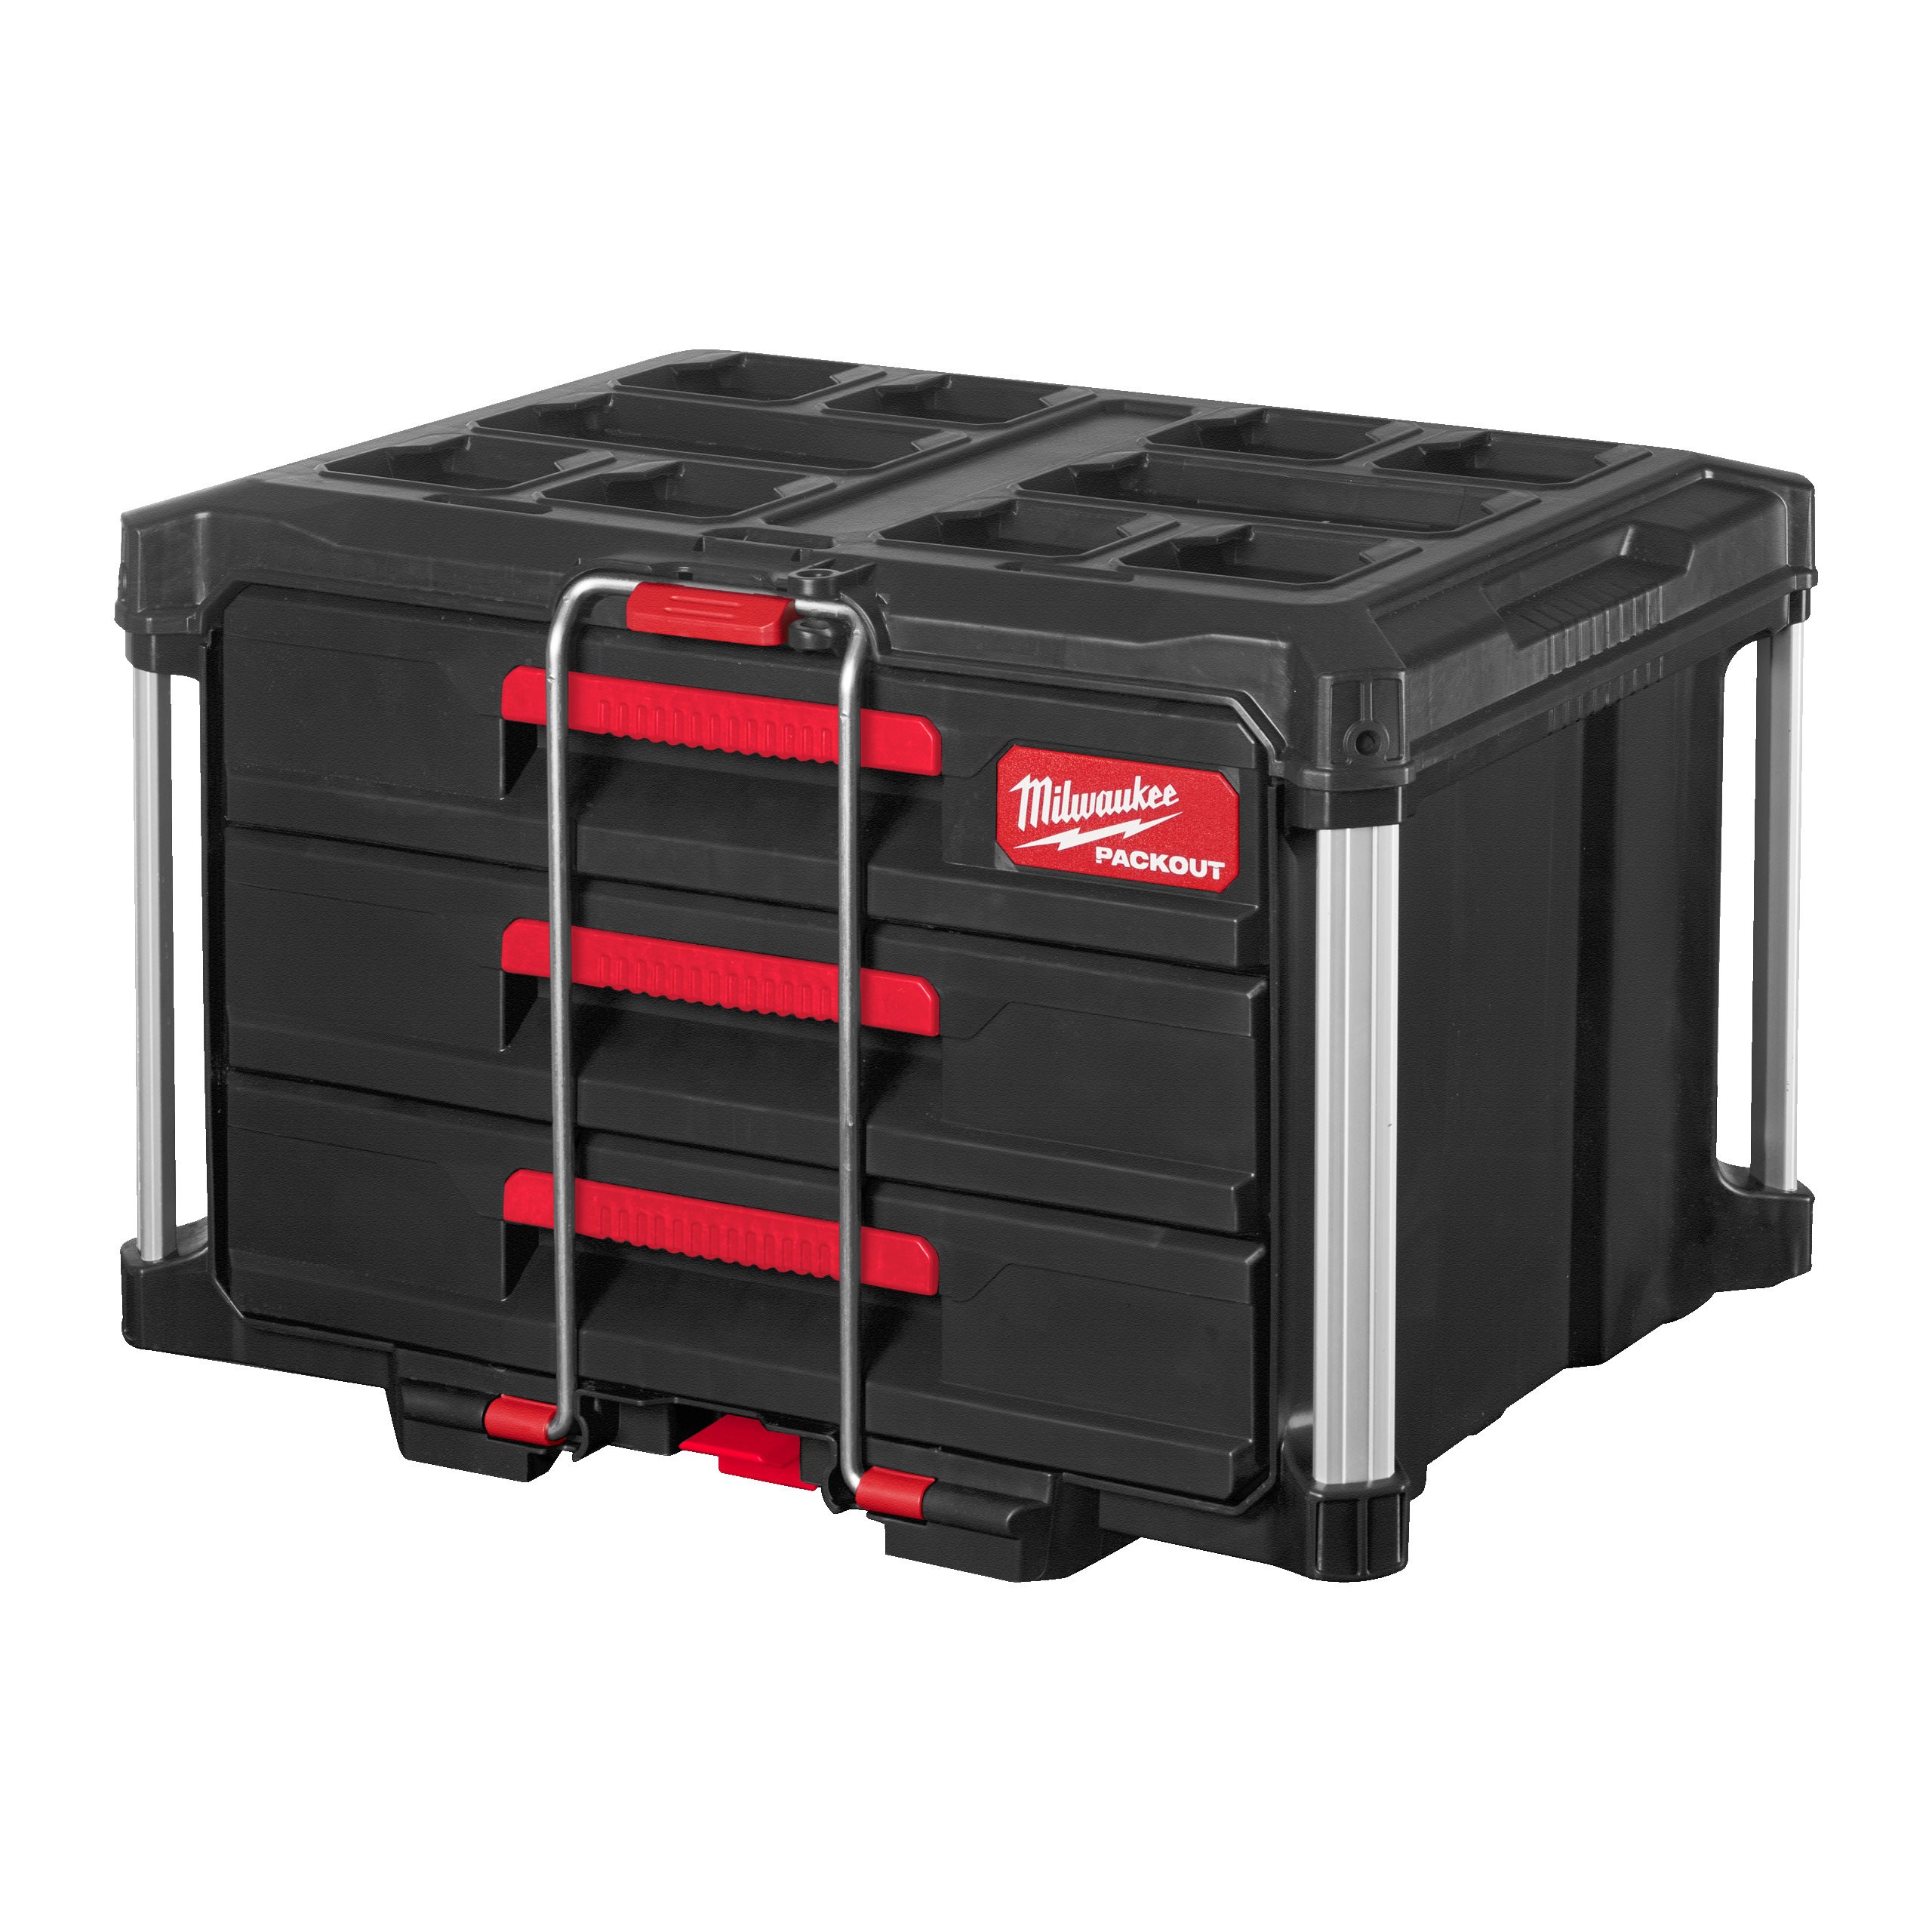 PACKOUT™ 3 drawer tool box